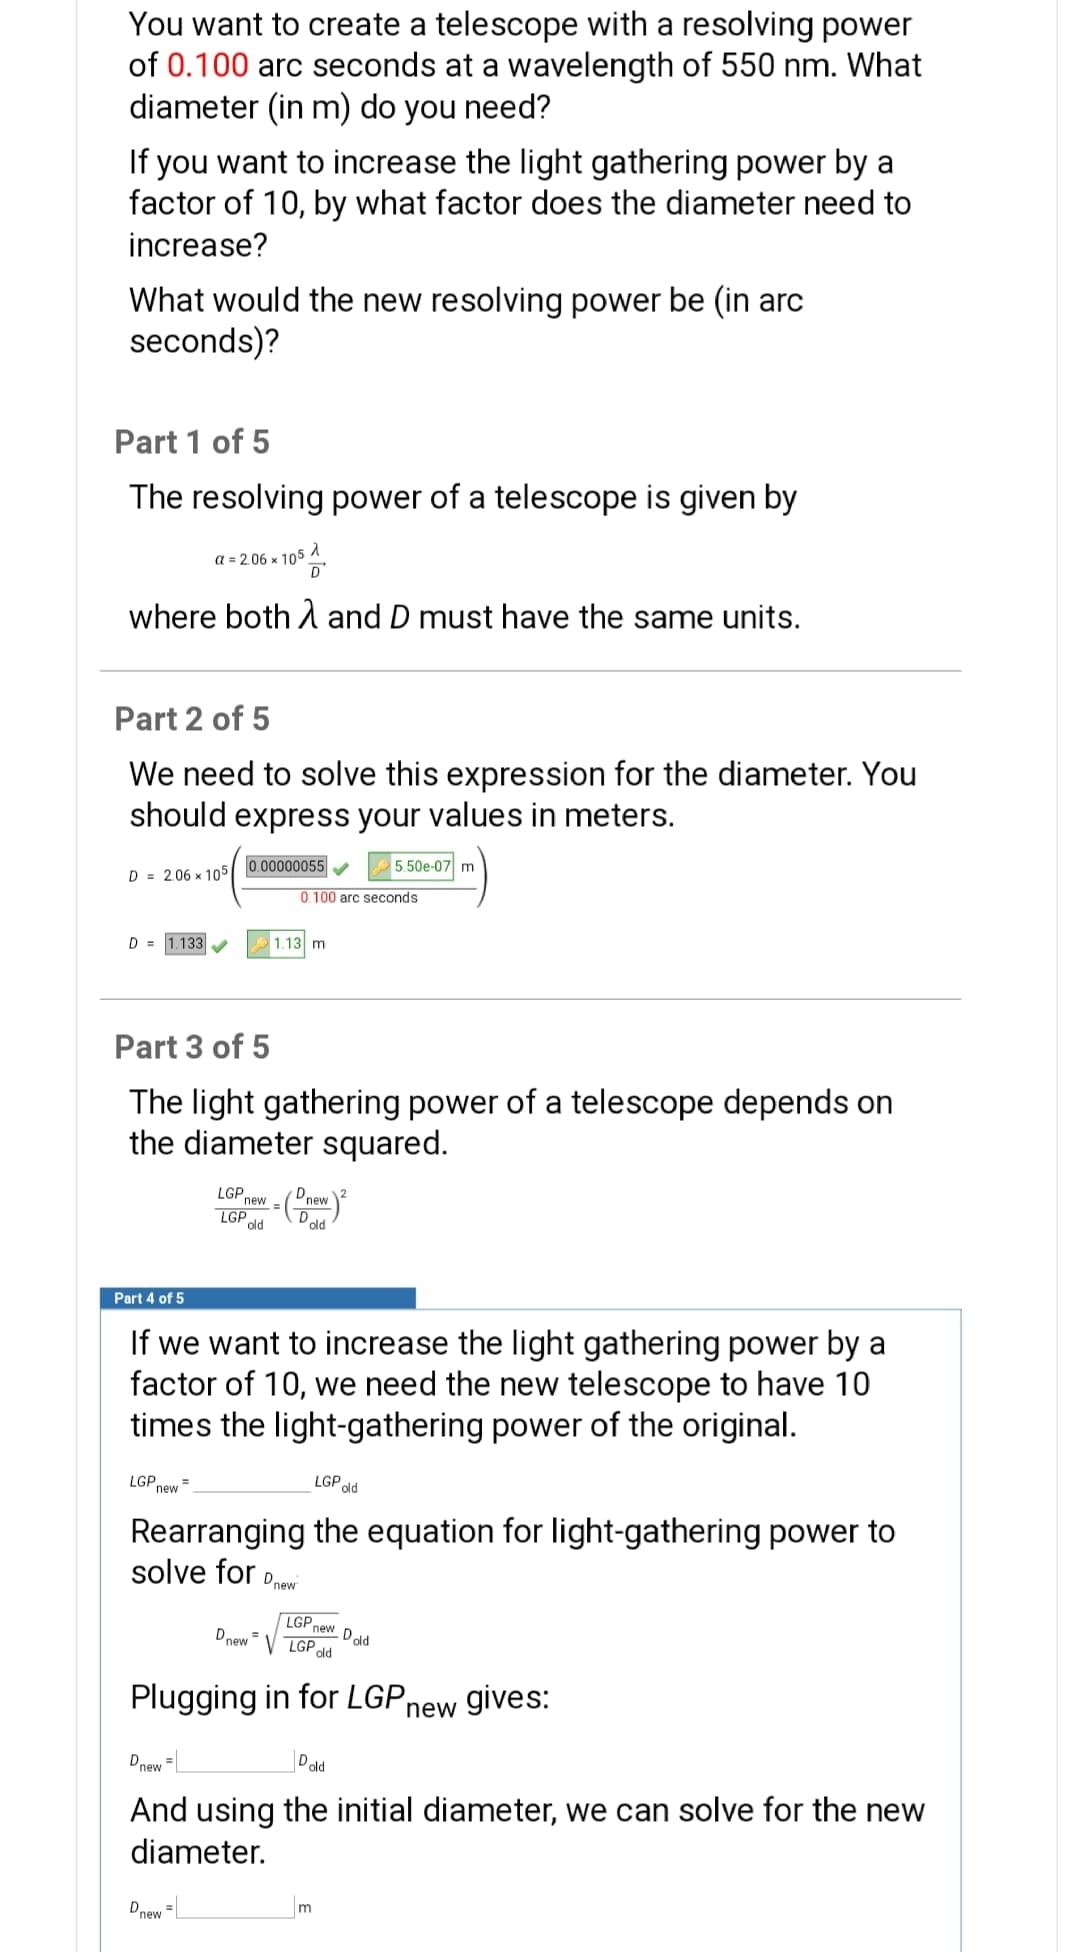 You want to create a telescope with a resolving power
of 0.100 arc seconds at a wavelength of 550 nm. What
diameter (in m) do you need?
If you want to increase the light gathering power by a
factor of 10, by what factor does the diameter need to
increase?
What would the new resolving power be (in arc
seconds)?
Part 1 of 5
The resolving power of a telescope is given by
a = 2.06 x 105
D'
where both A and D must have the same units.
Part 2 of 5
We need to solve this expression for the diameter. You
should express your values in meters.
0.00000055
5.50e-07 m
D = 2.06 x 105|
0.100 arc seconds
D =
1.133
1.13 m
Part 3 of 5
The light gathering power of a telescope depends on
the diameter squared.
:-(Pnew
LGP new =
D.
LGP
old
old
Part 4 of 5
If we want to increase the light gathering power by a
factor of 10, we need the new telescope to have 10
times the light-gathering power of the original.
LGP new
LGP old
Rearranging the equation for light-gathering power to
solve for
Dnew
LGP new Dold
Dnew
V ZGP
old
Plugging in for LGP,
gives:
ew
Dnew =
Dold
And using the initial diameter, we can solve for the new
diameter.
Dnew
m
